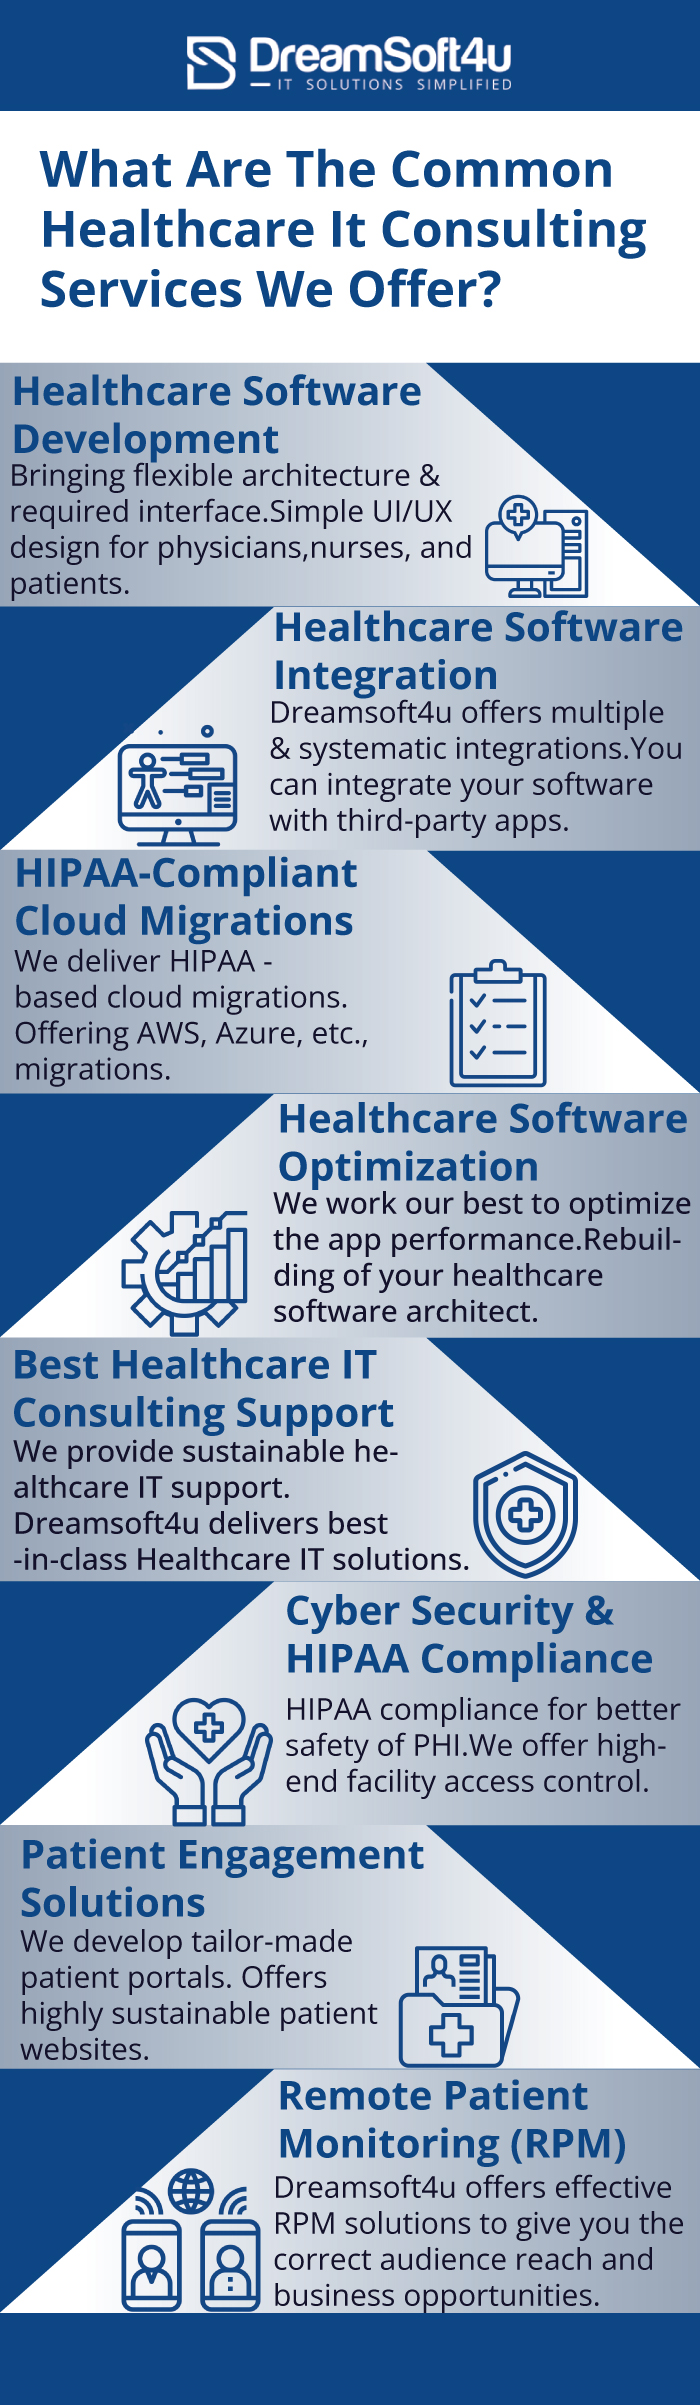 Top-Notch Healthcare IT Consulting Service